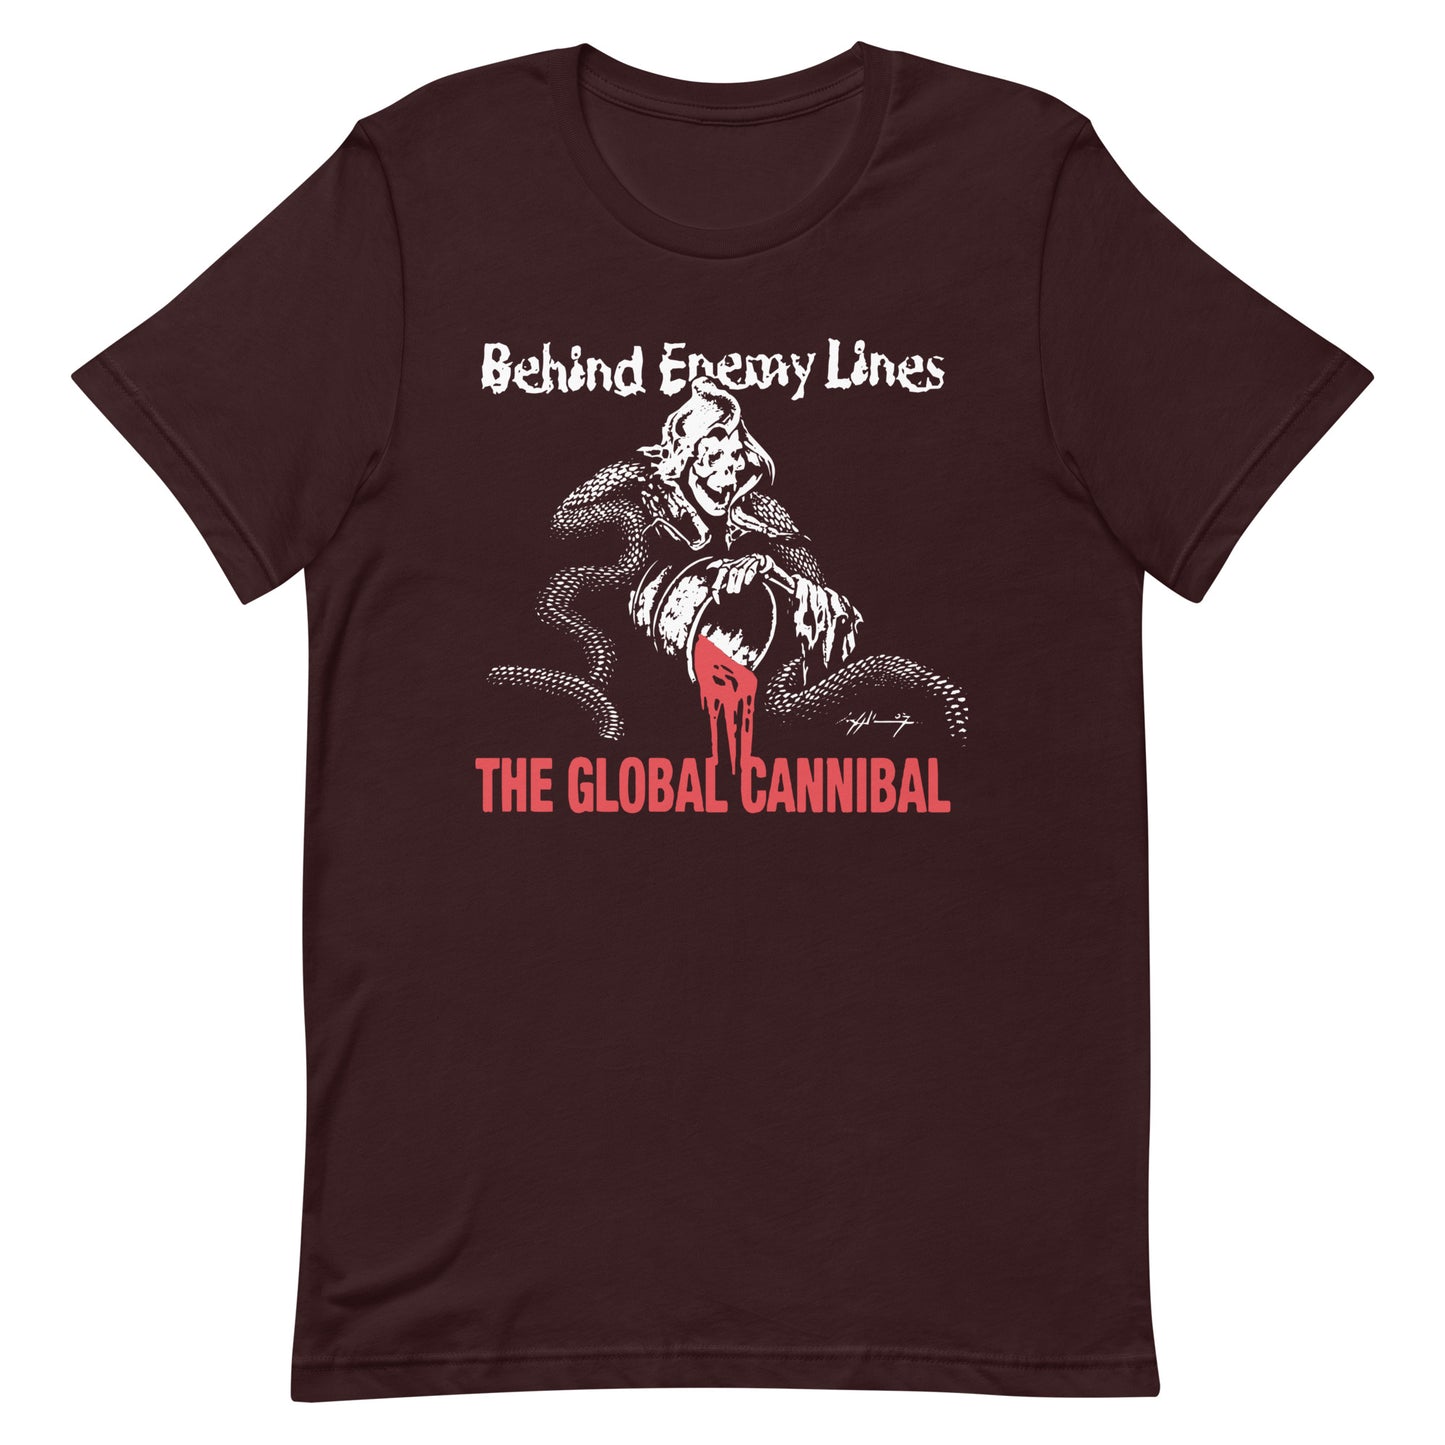 Behind Enemy Lines - The Global Cannibal T-Shirt